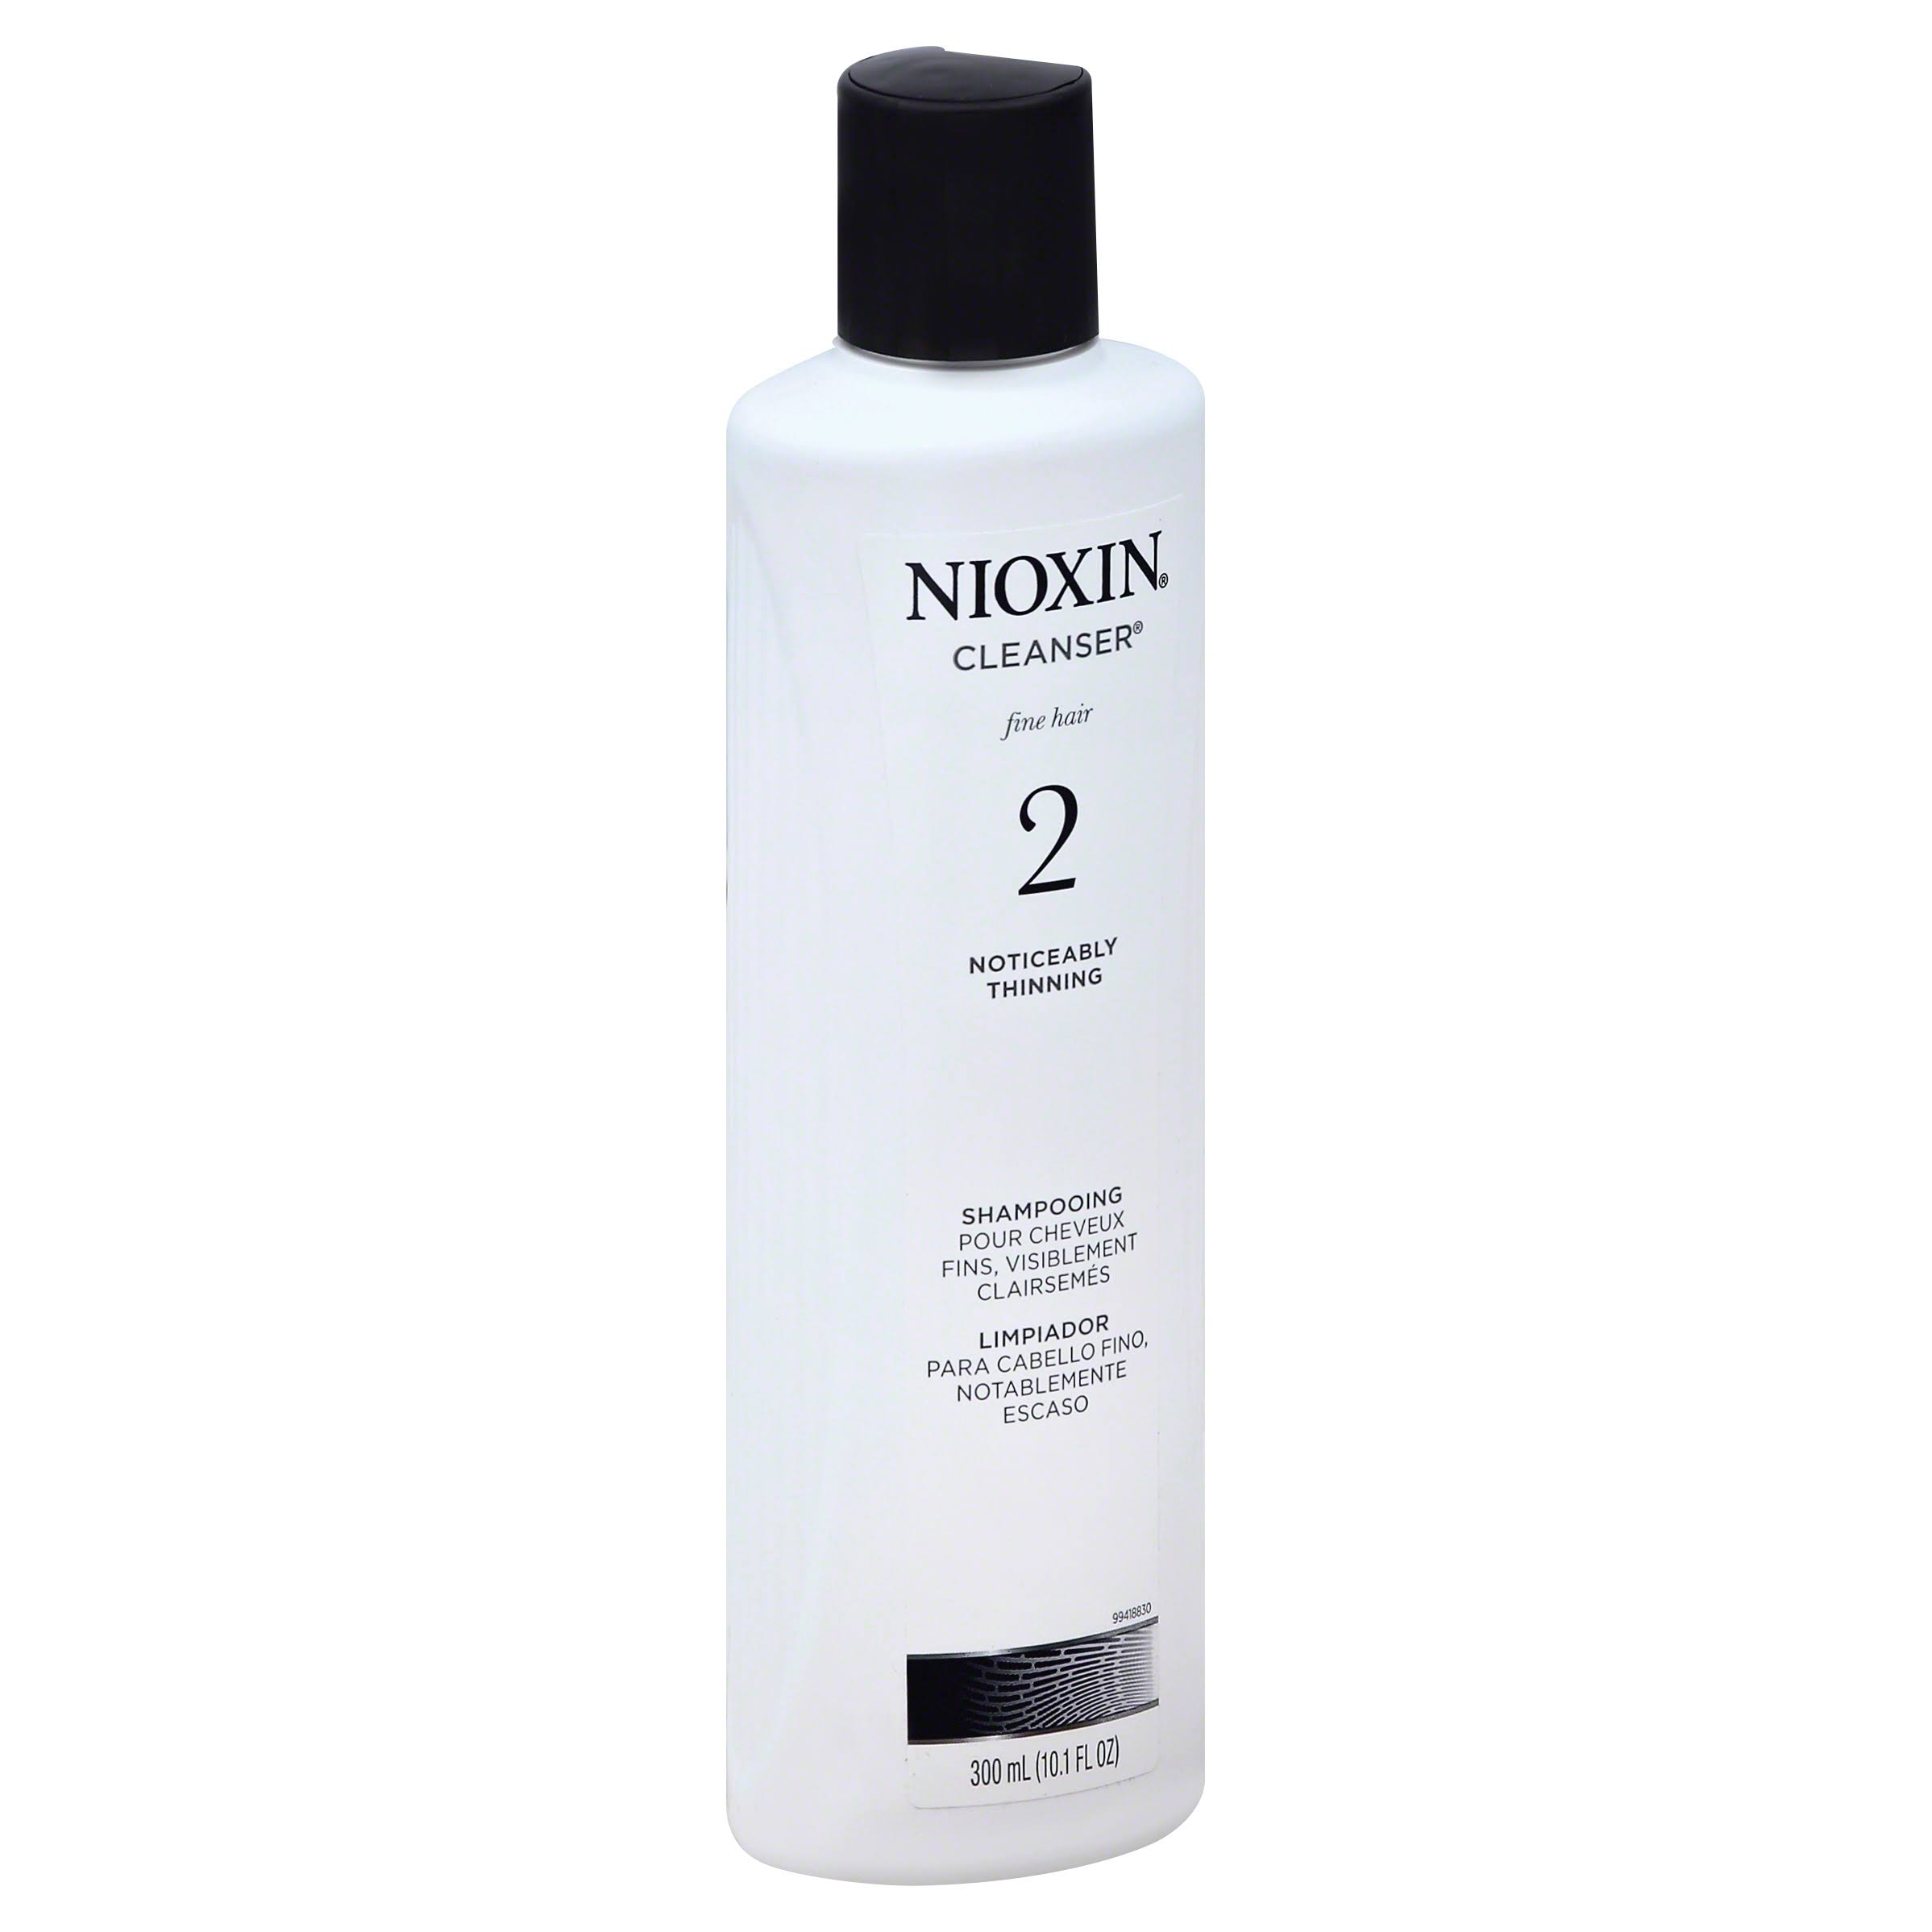 Nioxin Cleanser for Fine Hair - Noticeably Thinning, 10.1oz